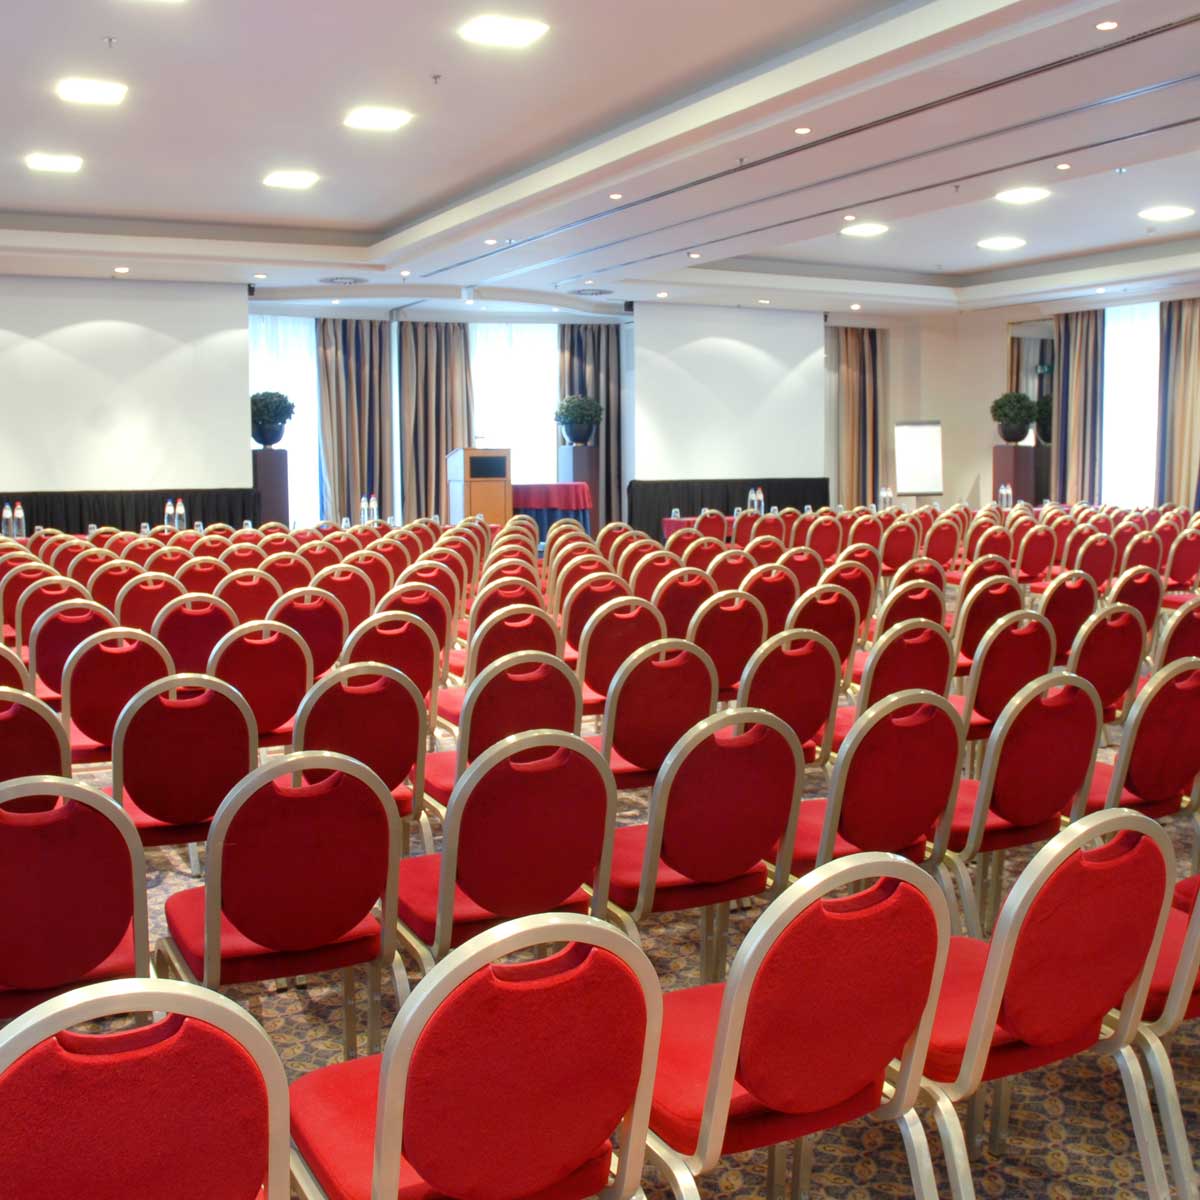 auditorium-and-banquet-event-hall-with-rows-of-chairs-for-guests